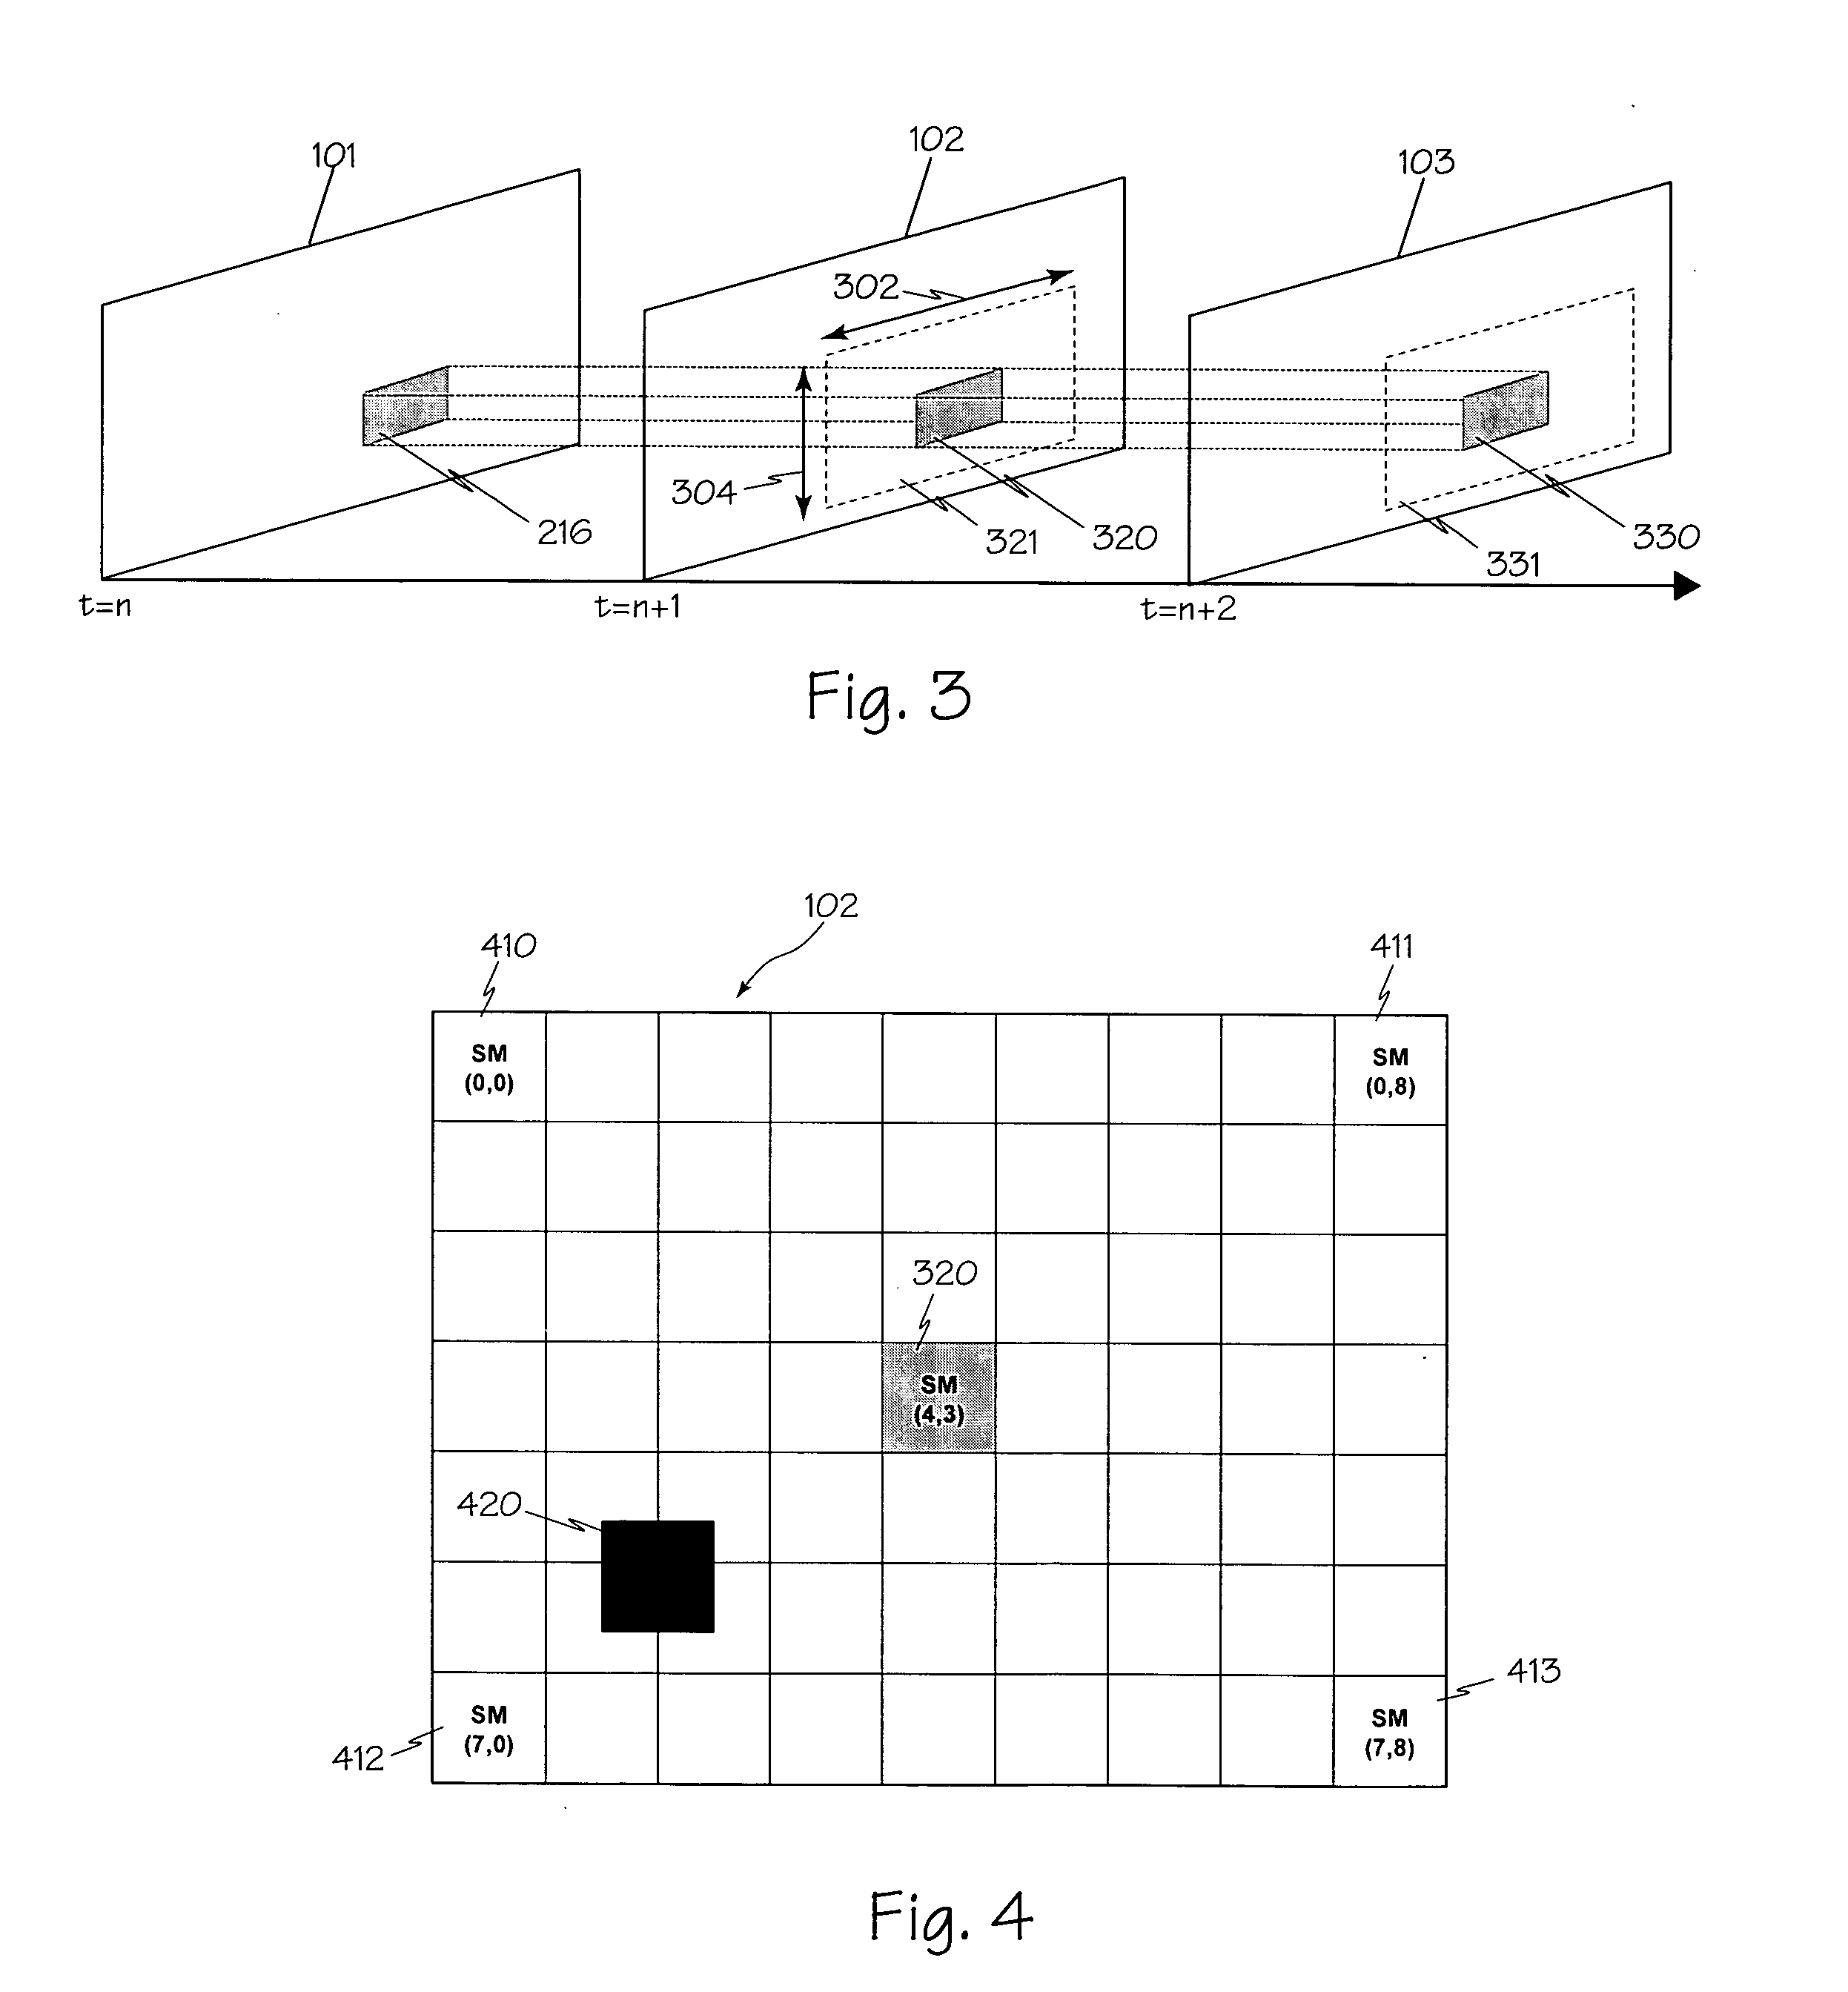 High performance memory and system organization for digital signal processing